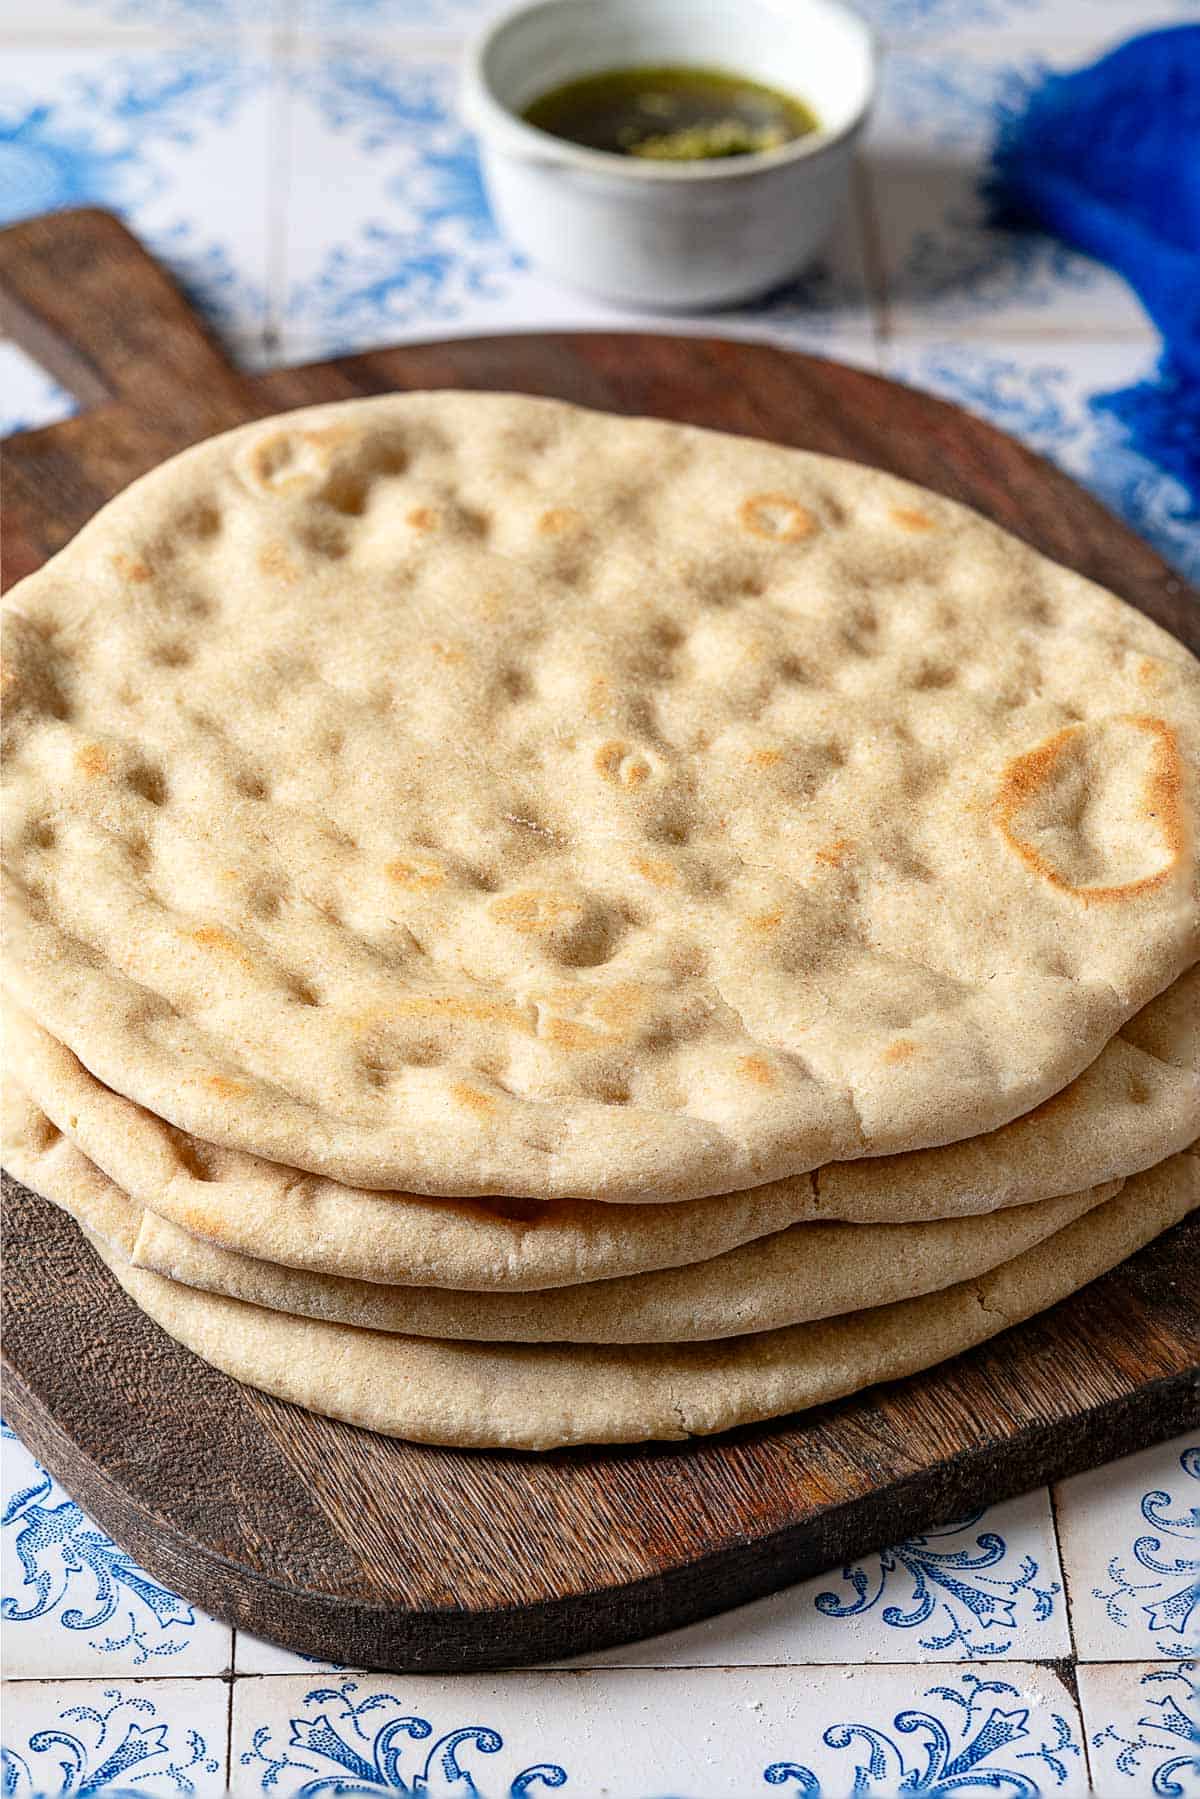 a close up of a stack of baked taboon flatbreads on a wooden serving tray in front of a small bowl of olive oil and a blue cloth napkin.